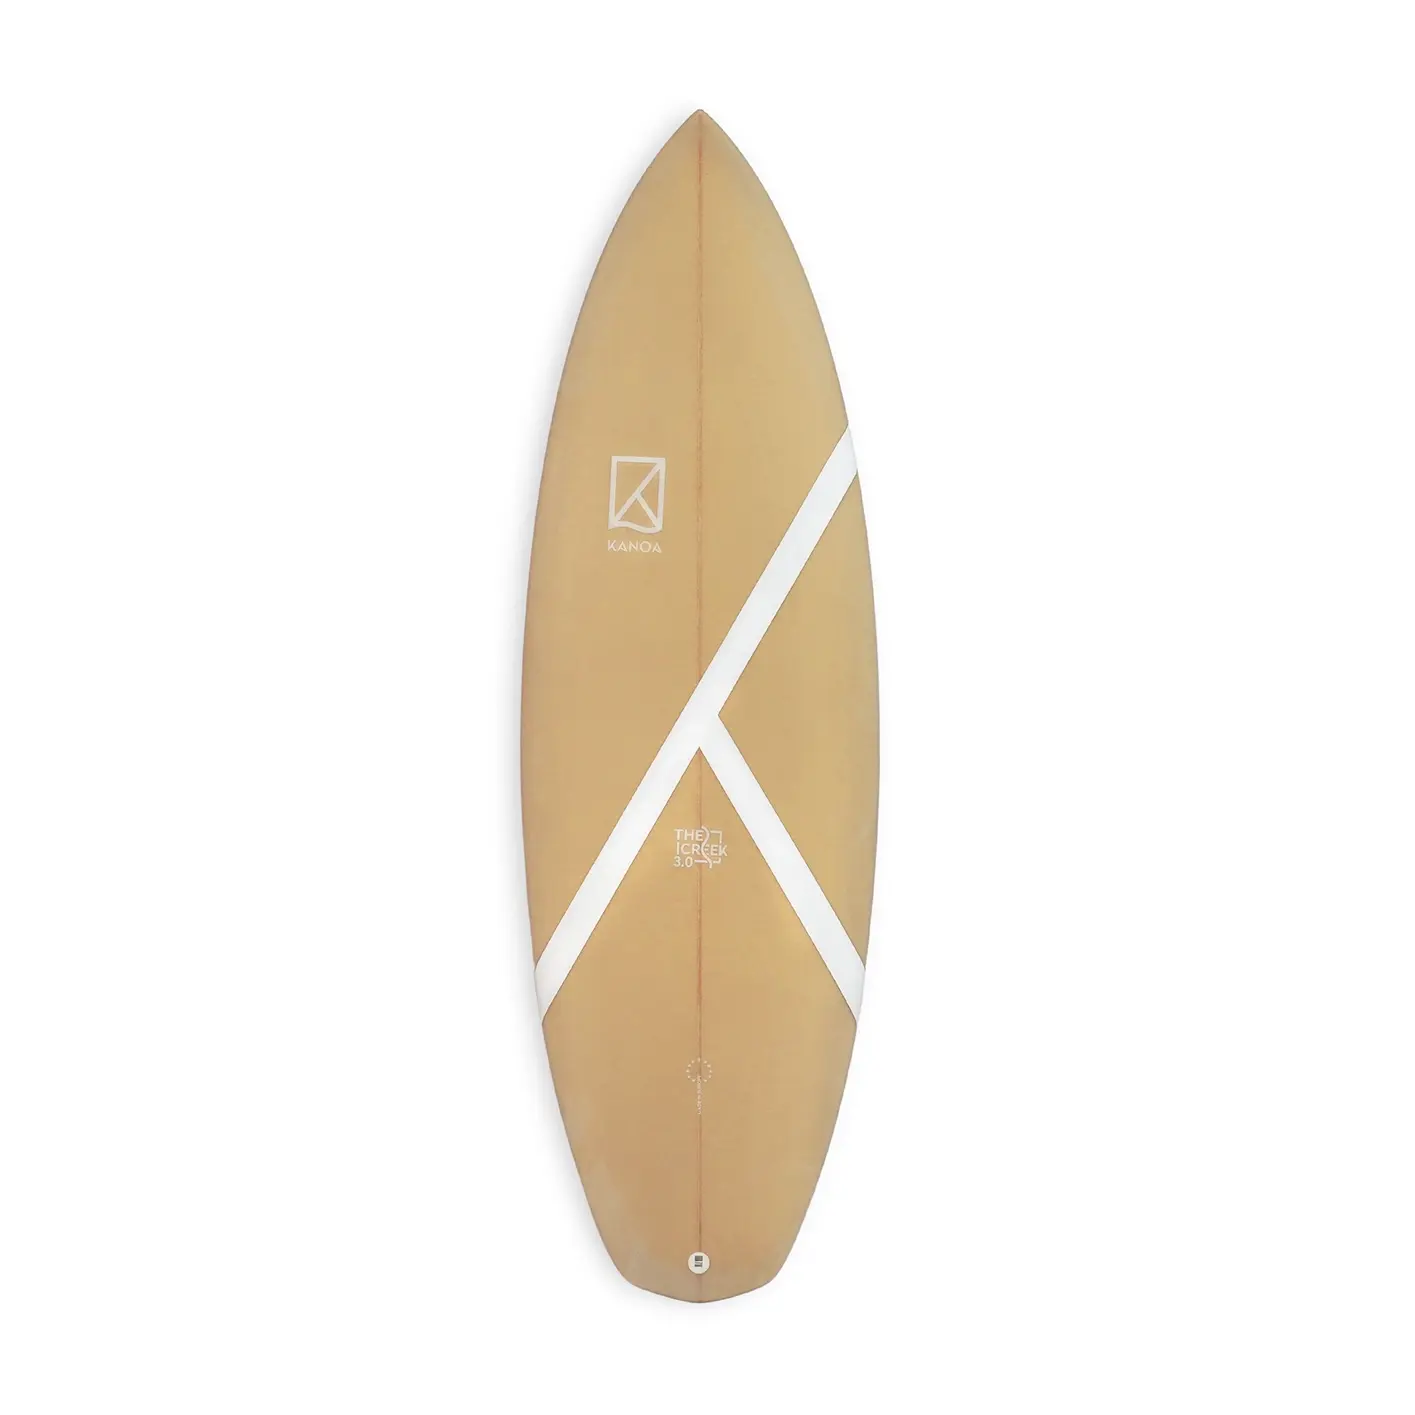 Sustainable and eco-friendly High-Performance Riverboard Surfboard with Polyola Eco Foam